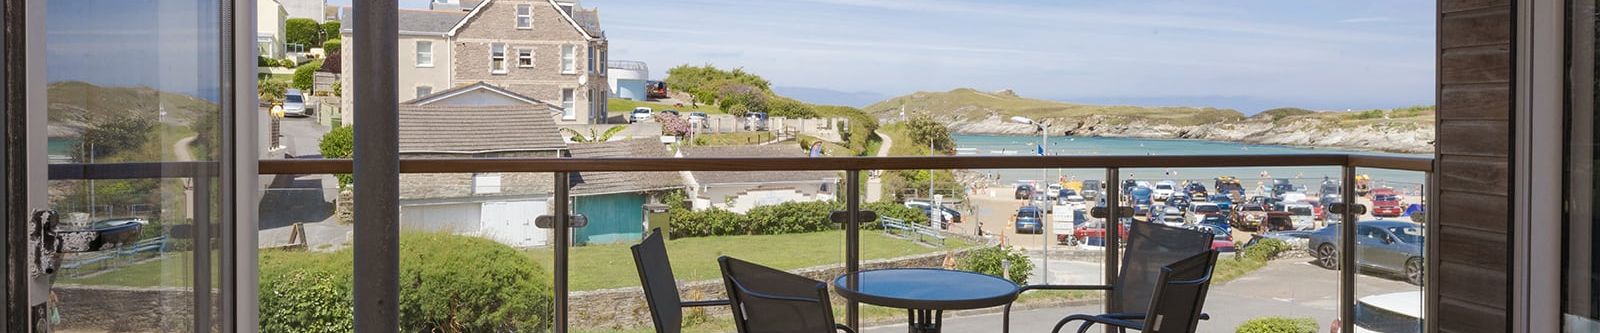 Porth Sands balcony view